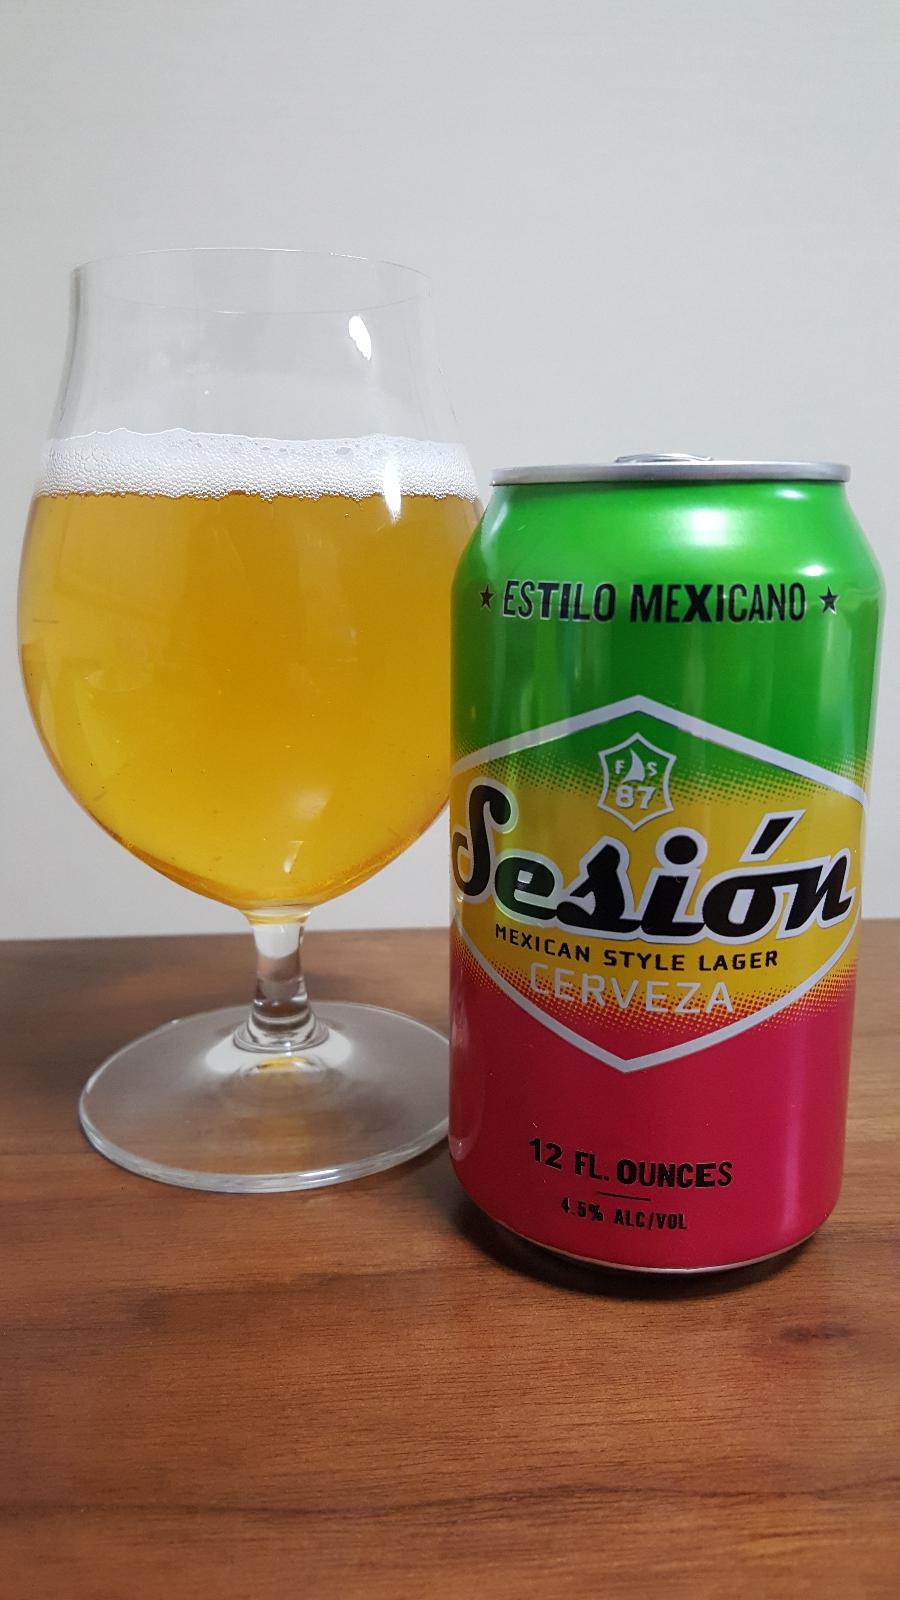 Session Mexican Style Lager